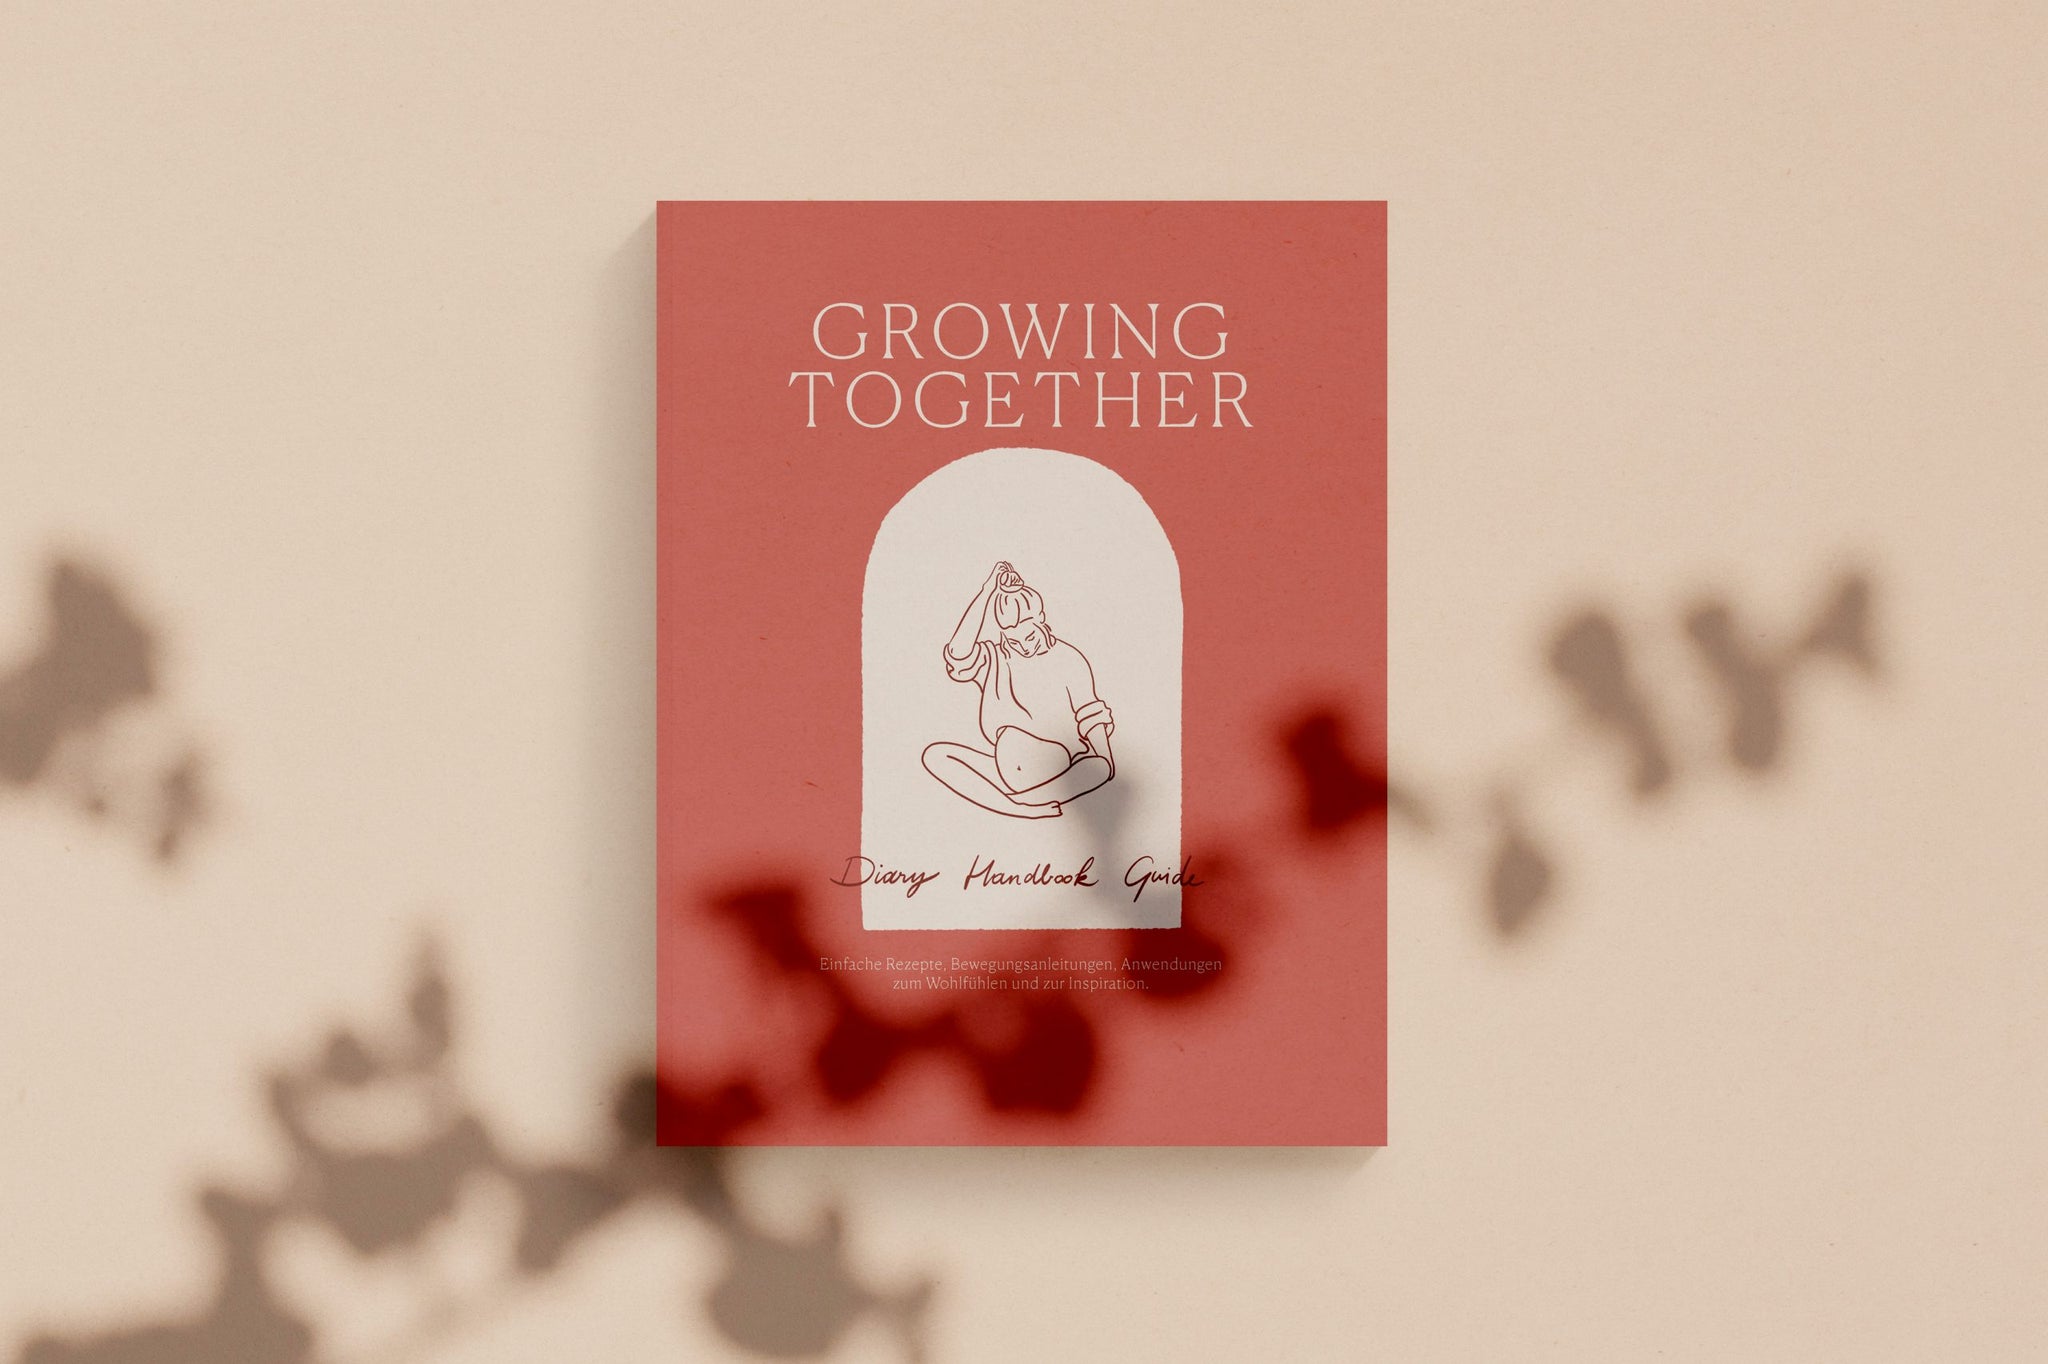 GROWING TOGETHER - THE BOOK